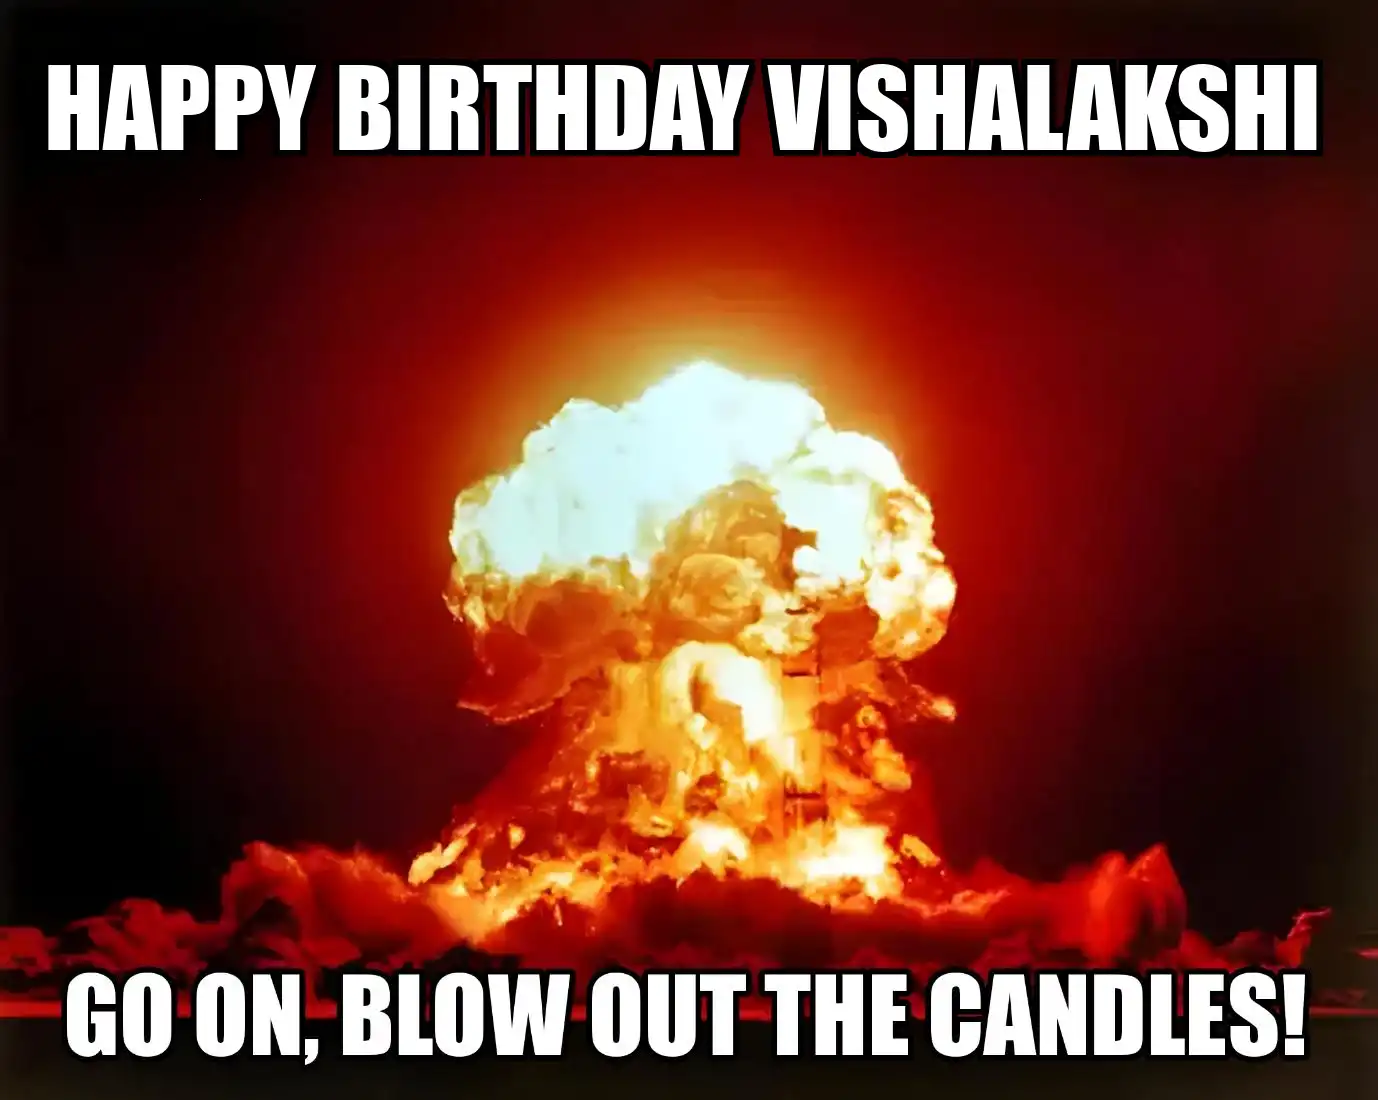 Happy Birthday Vishalakshi Go On Blow Out The Candles Meme